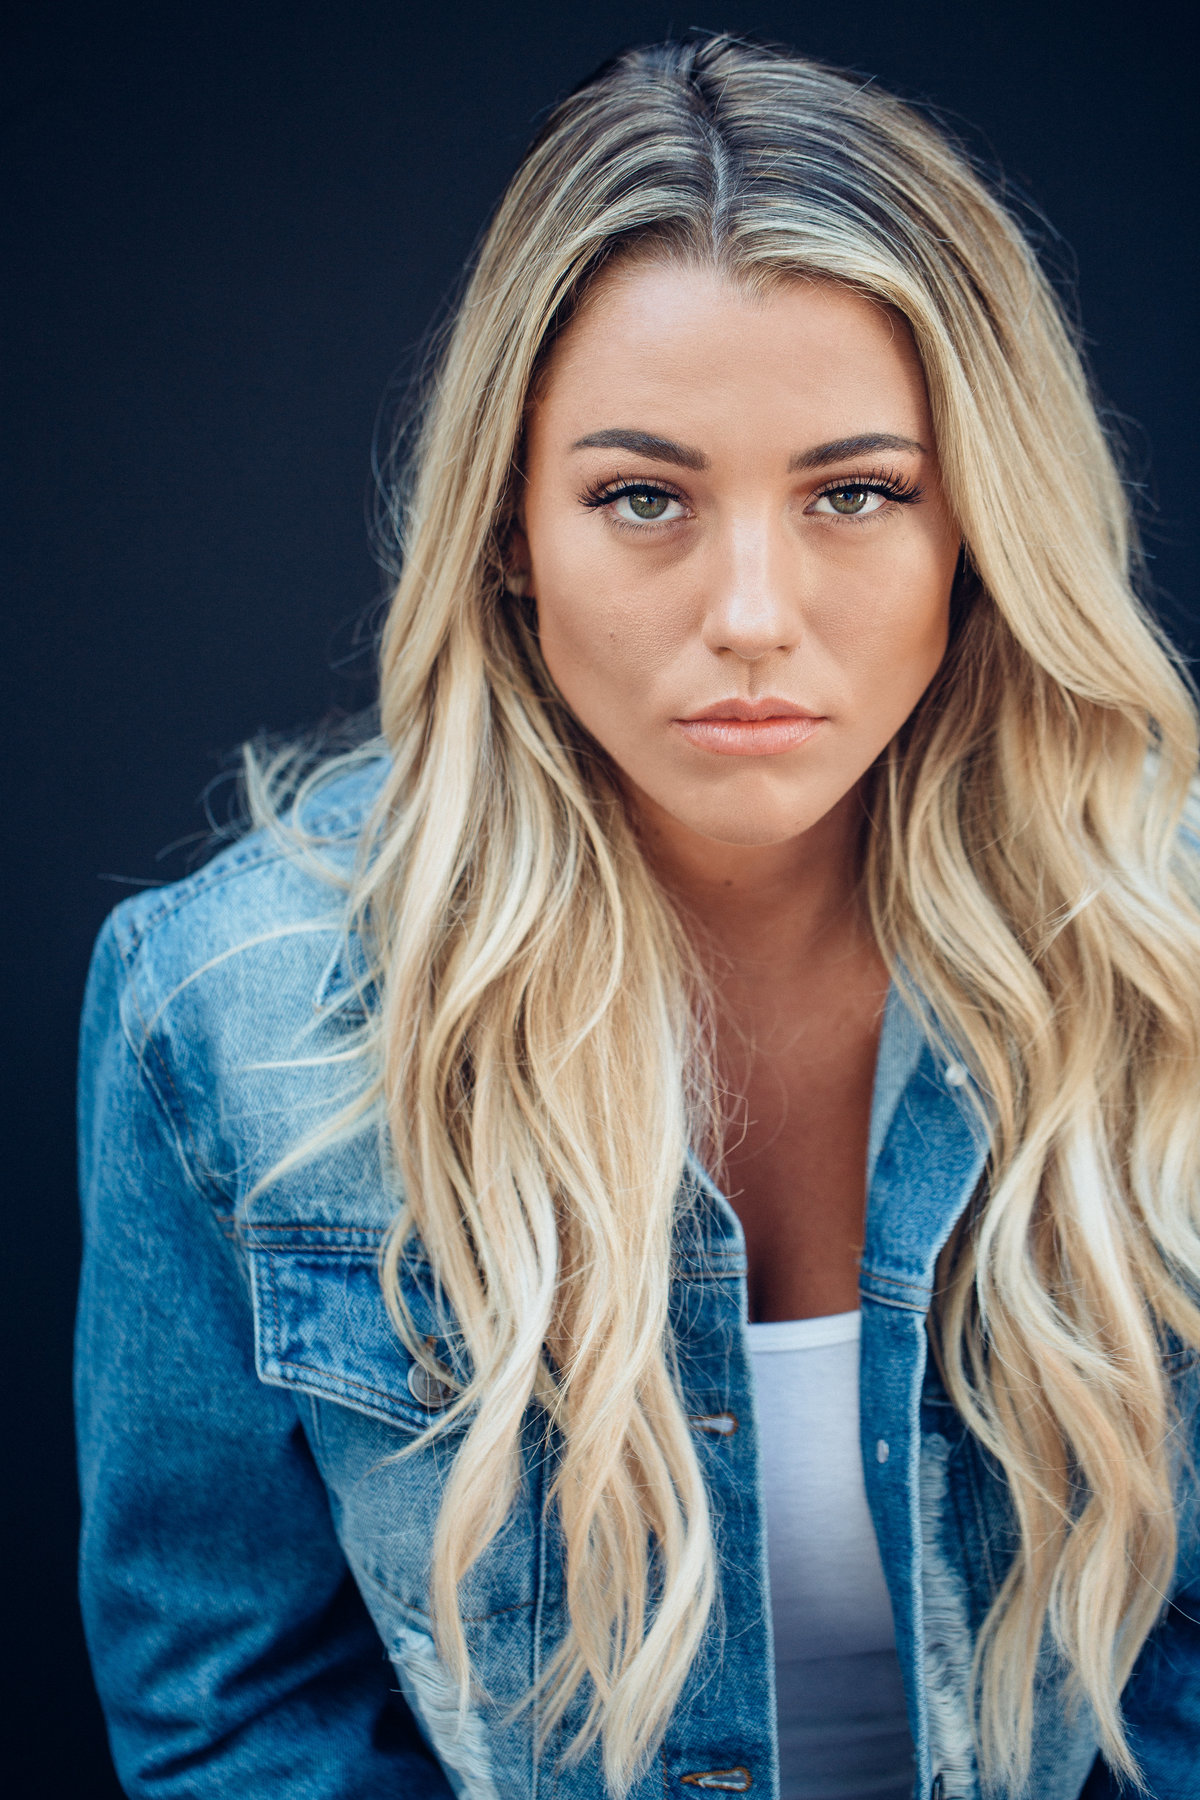 Headshot Photograph Of Young Woman In Outer Blue Denim Jacket And Inner White Shirt Los Angeles